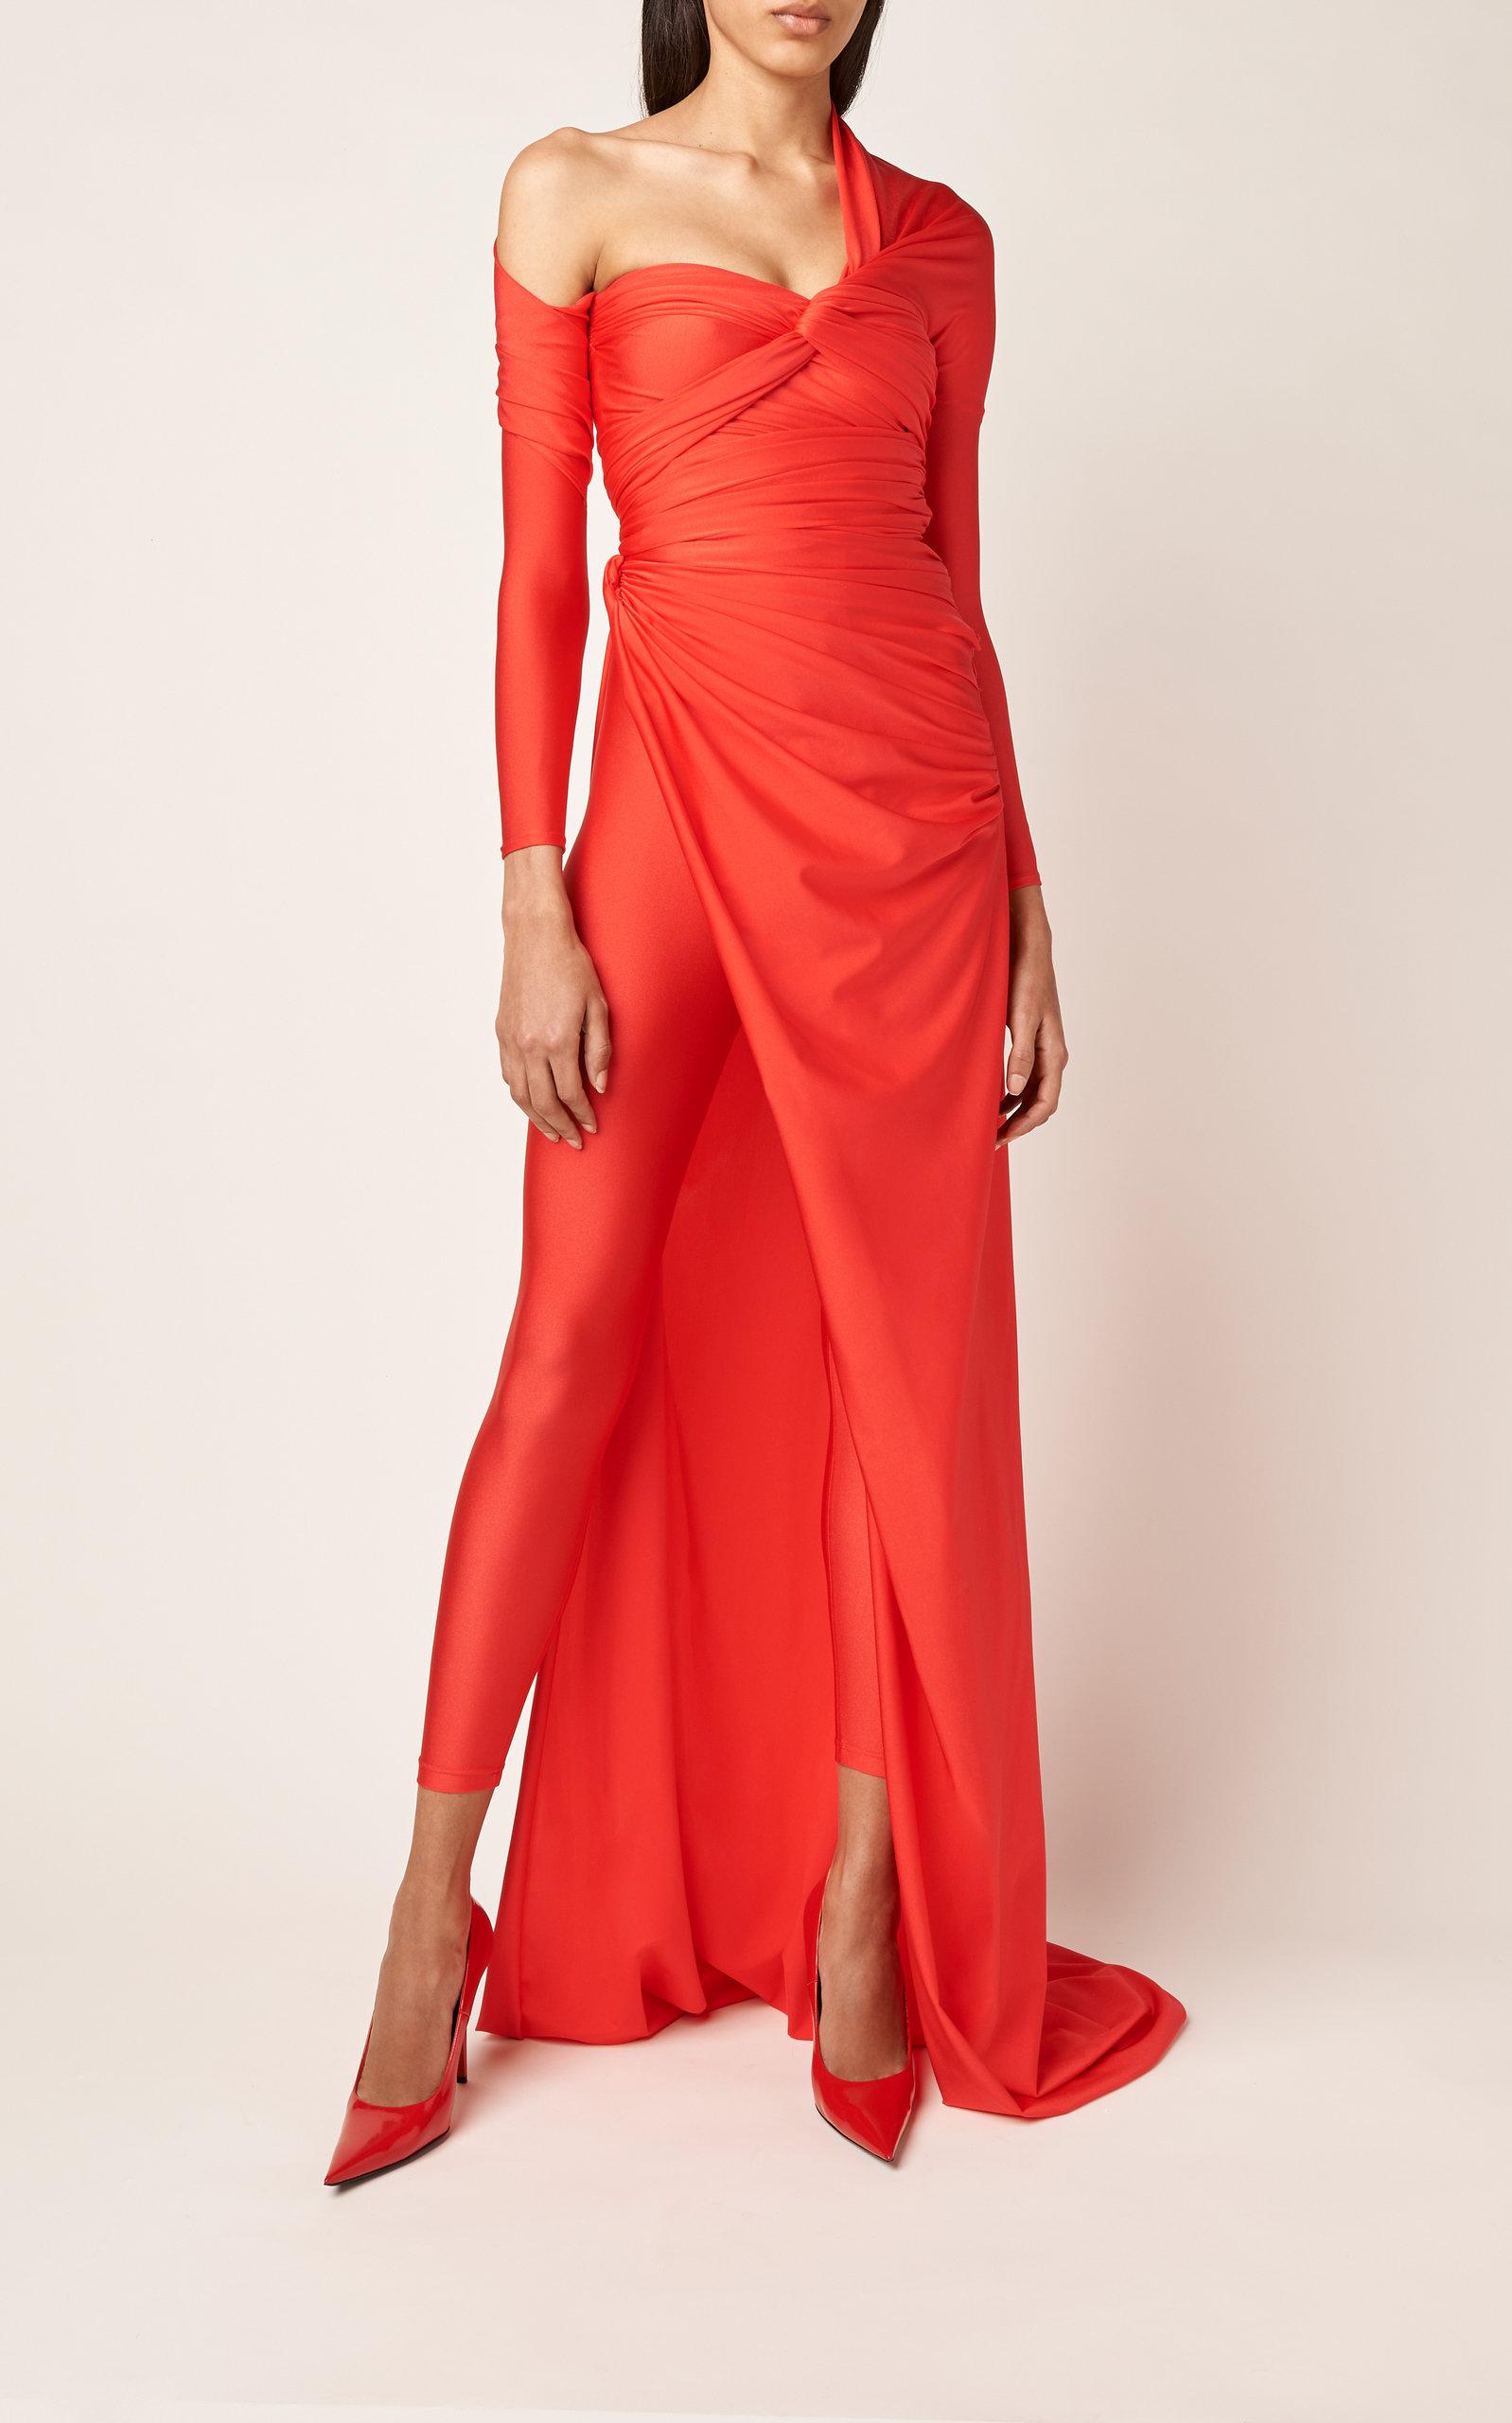 Balenciaga Draped Jersey Gown in Red | Lyst